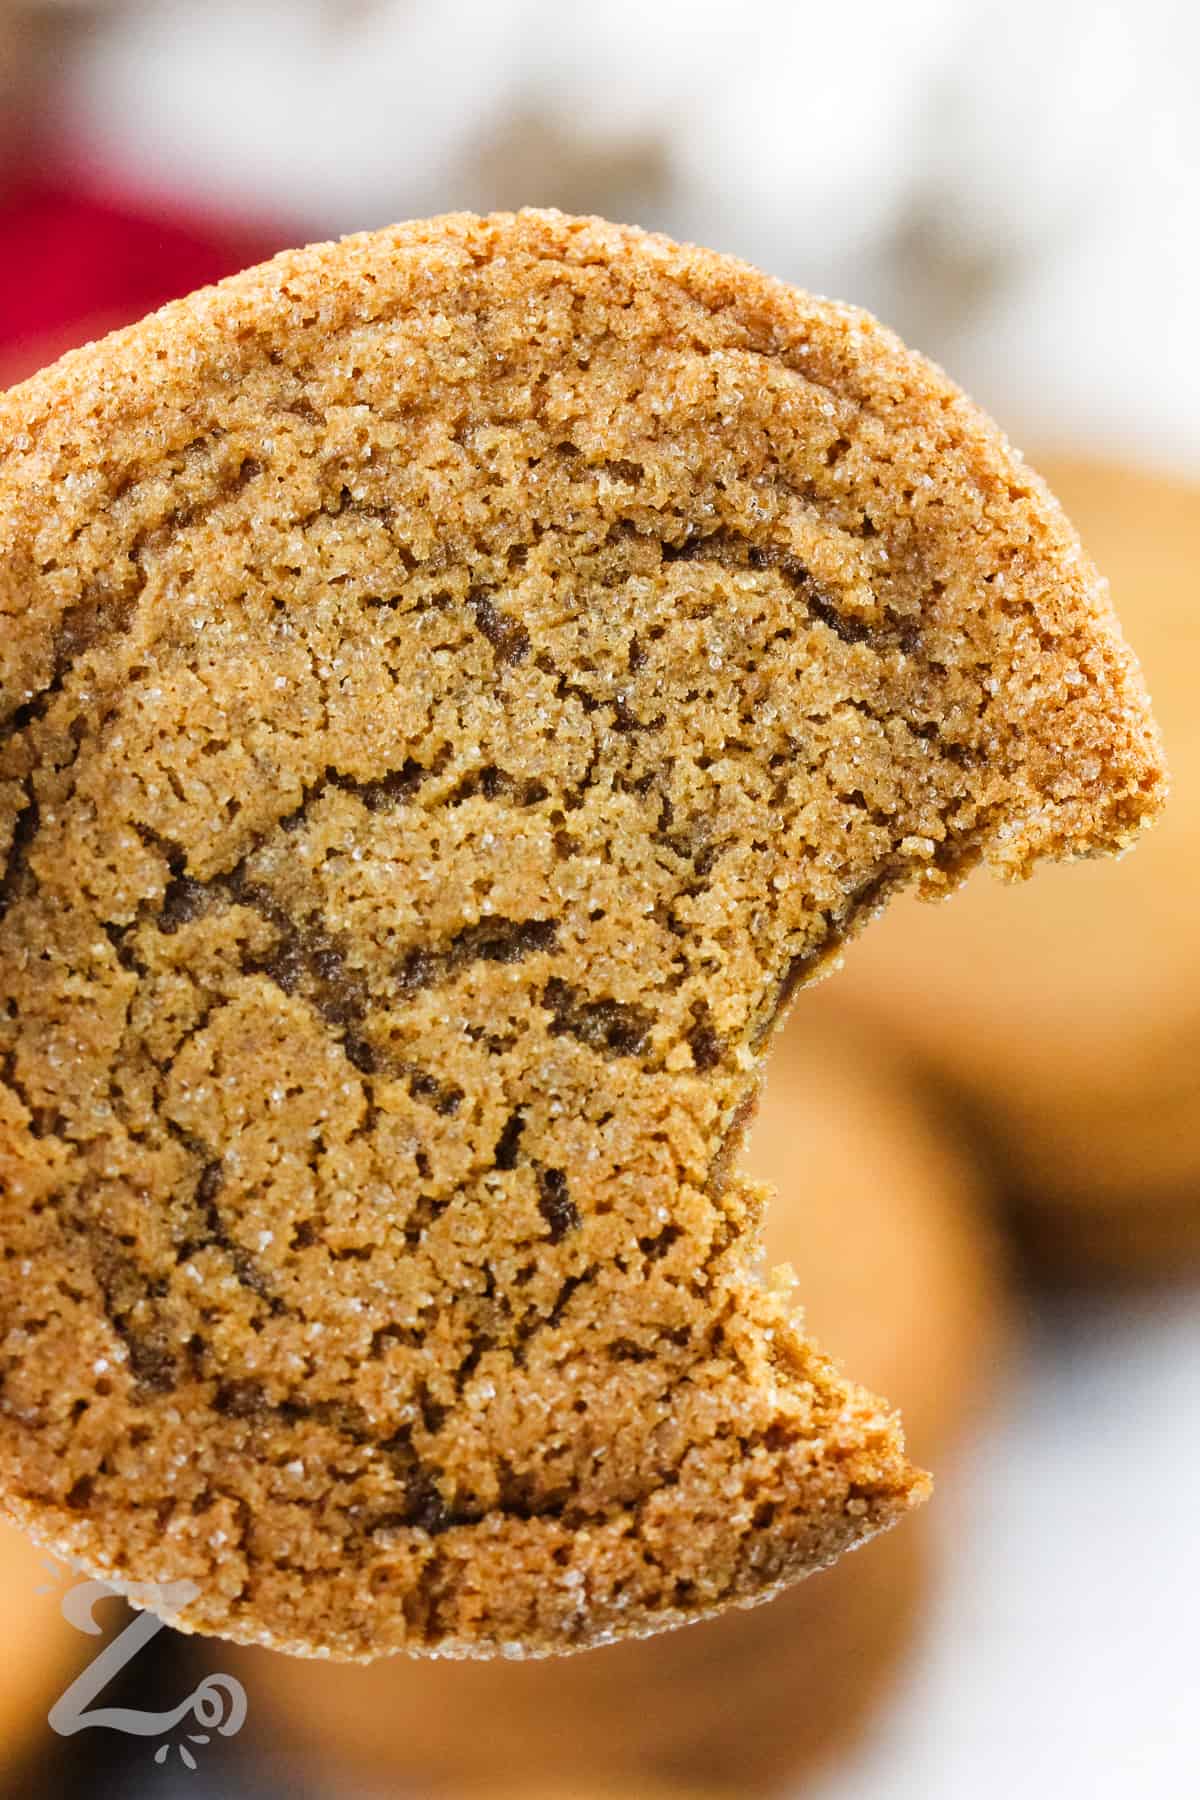 Ginger Cookies with a bite taken out of one